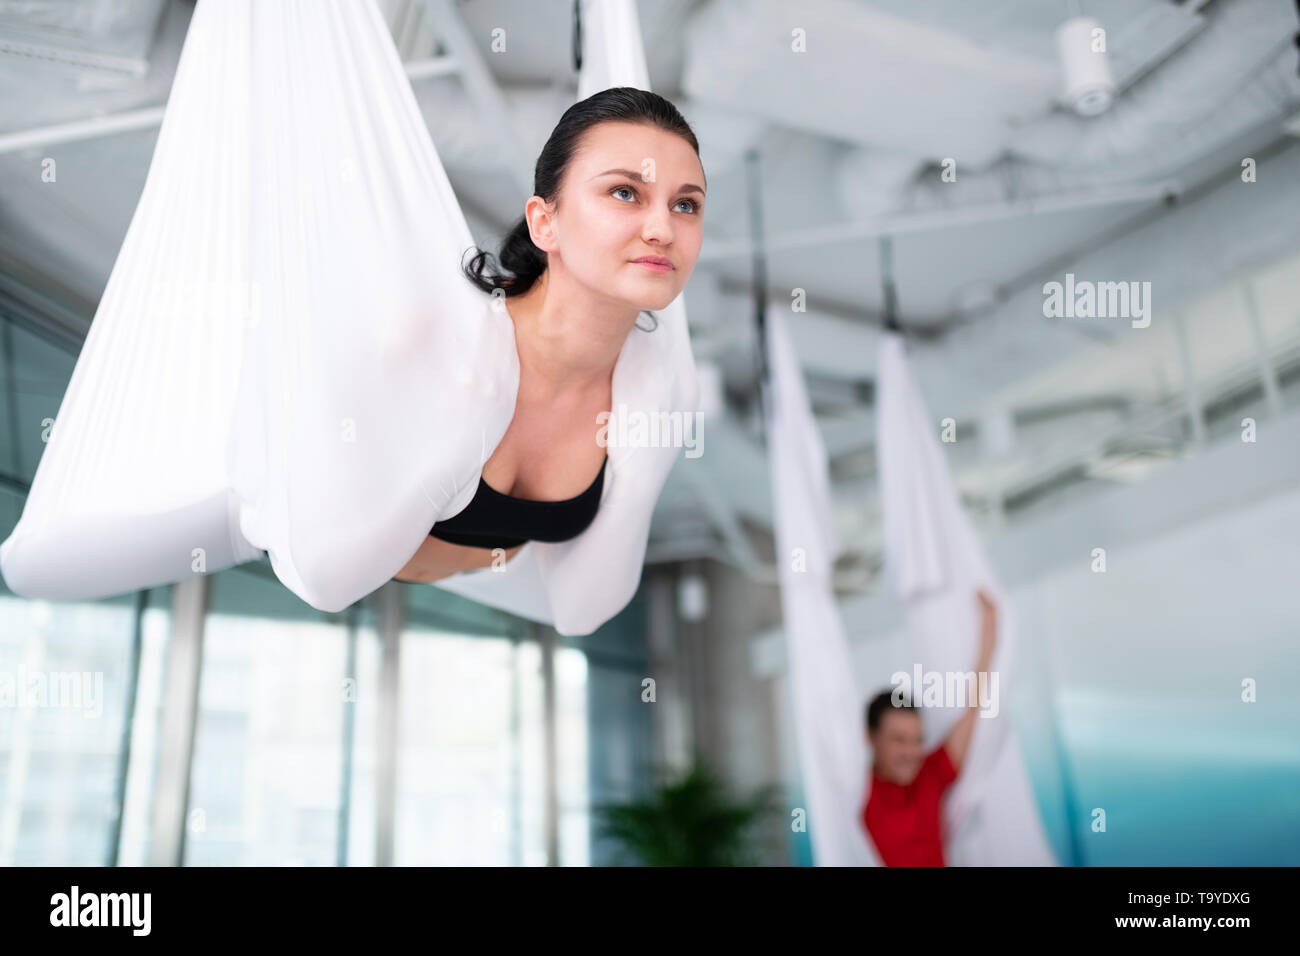 Dark-haired woman wearing black top trying aerial yoga Stock Photo